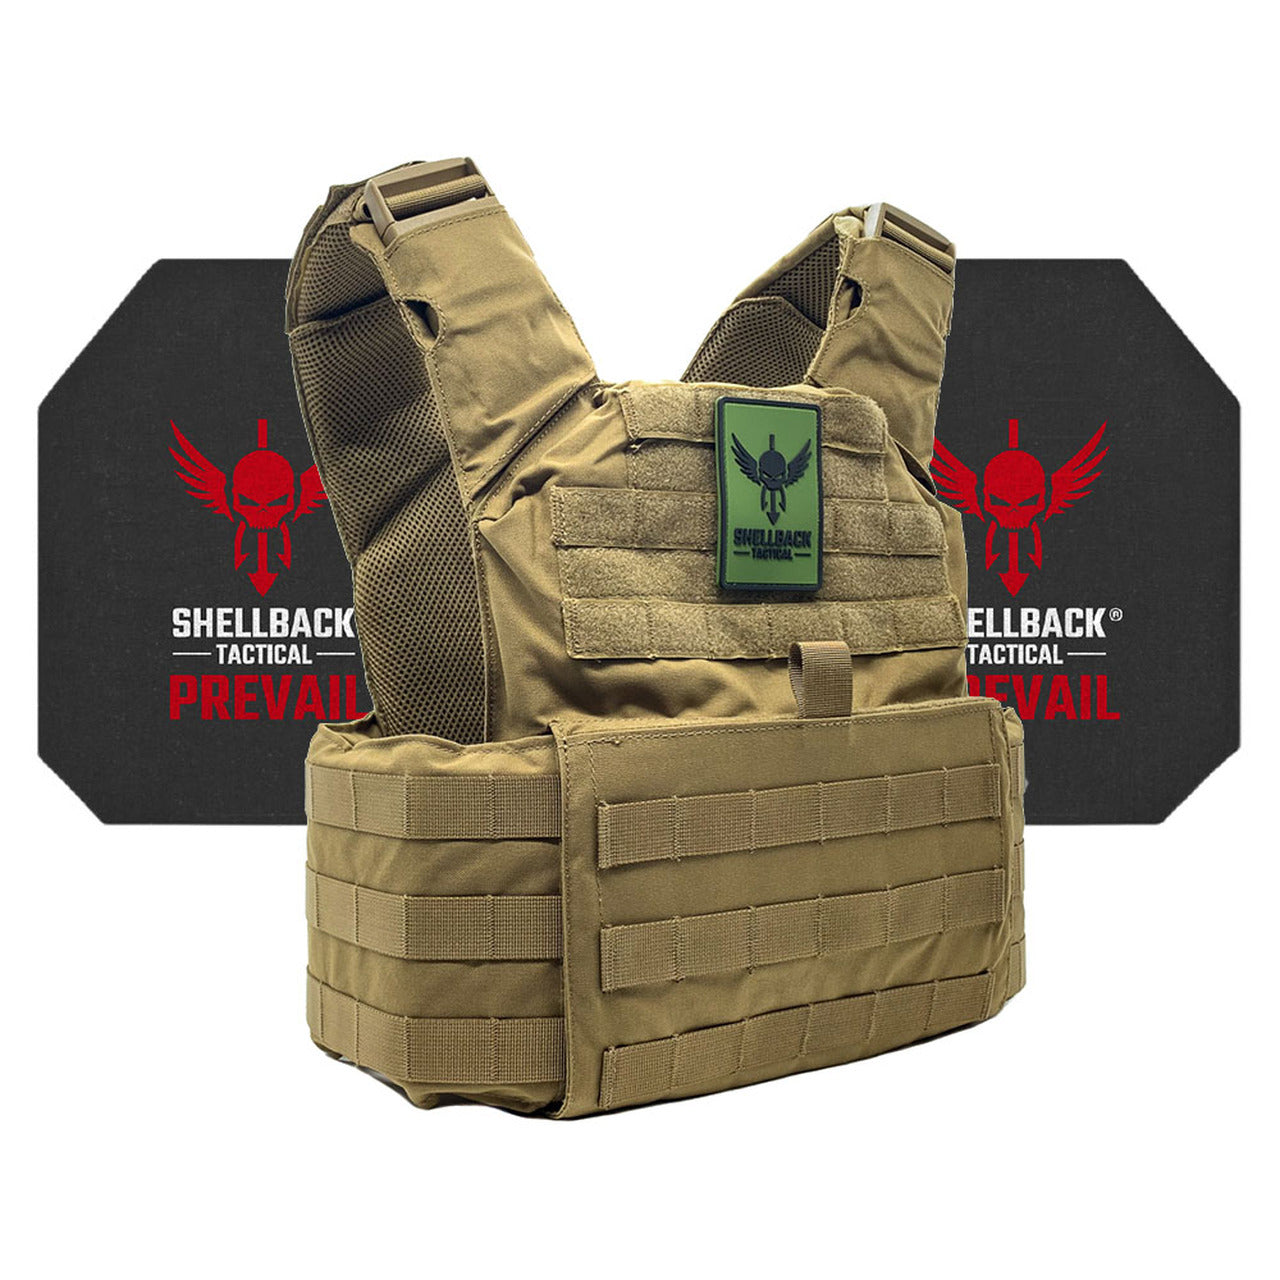 A Shellback Tactical Skirmish Active Shooter Kit with Level IV 4S17 Plates plate carrier with the word shieldback on it.